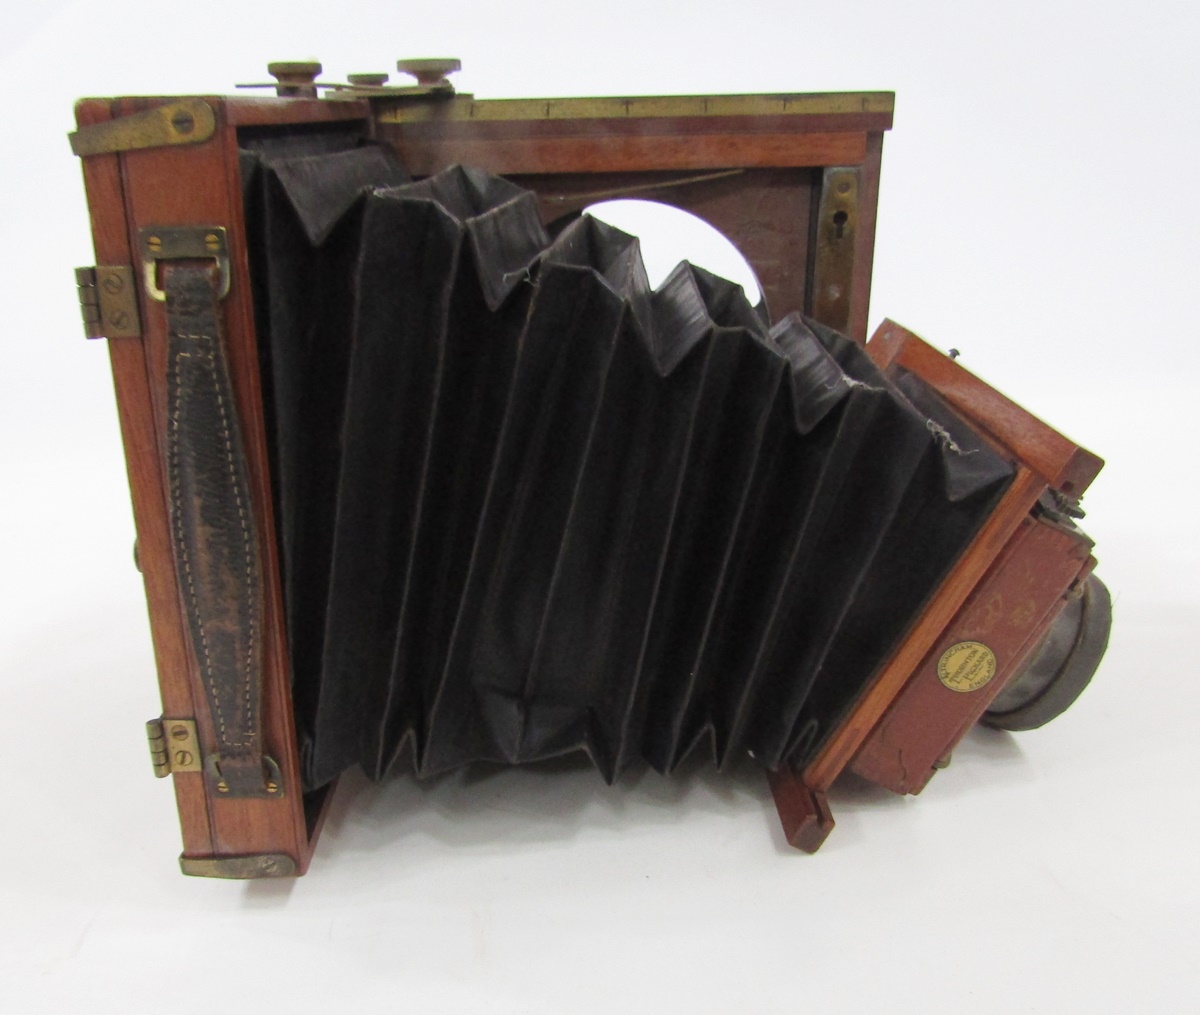 Late 19th/early 20th century Thornton Pickard Amber half plate mahogany cased field camera, patent